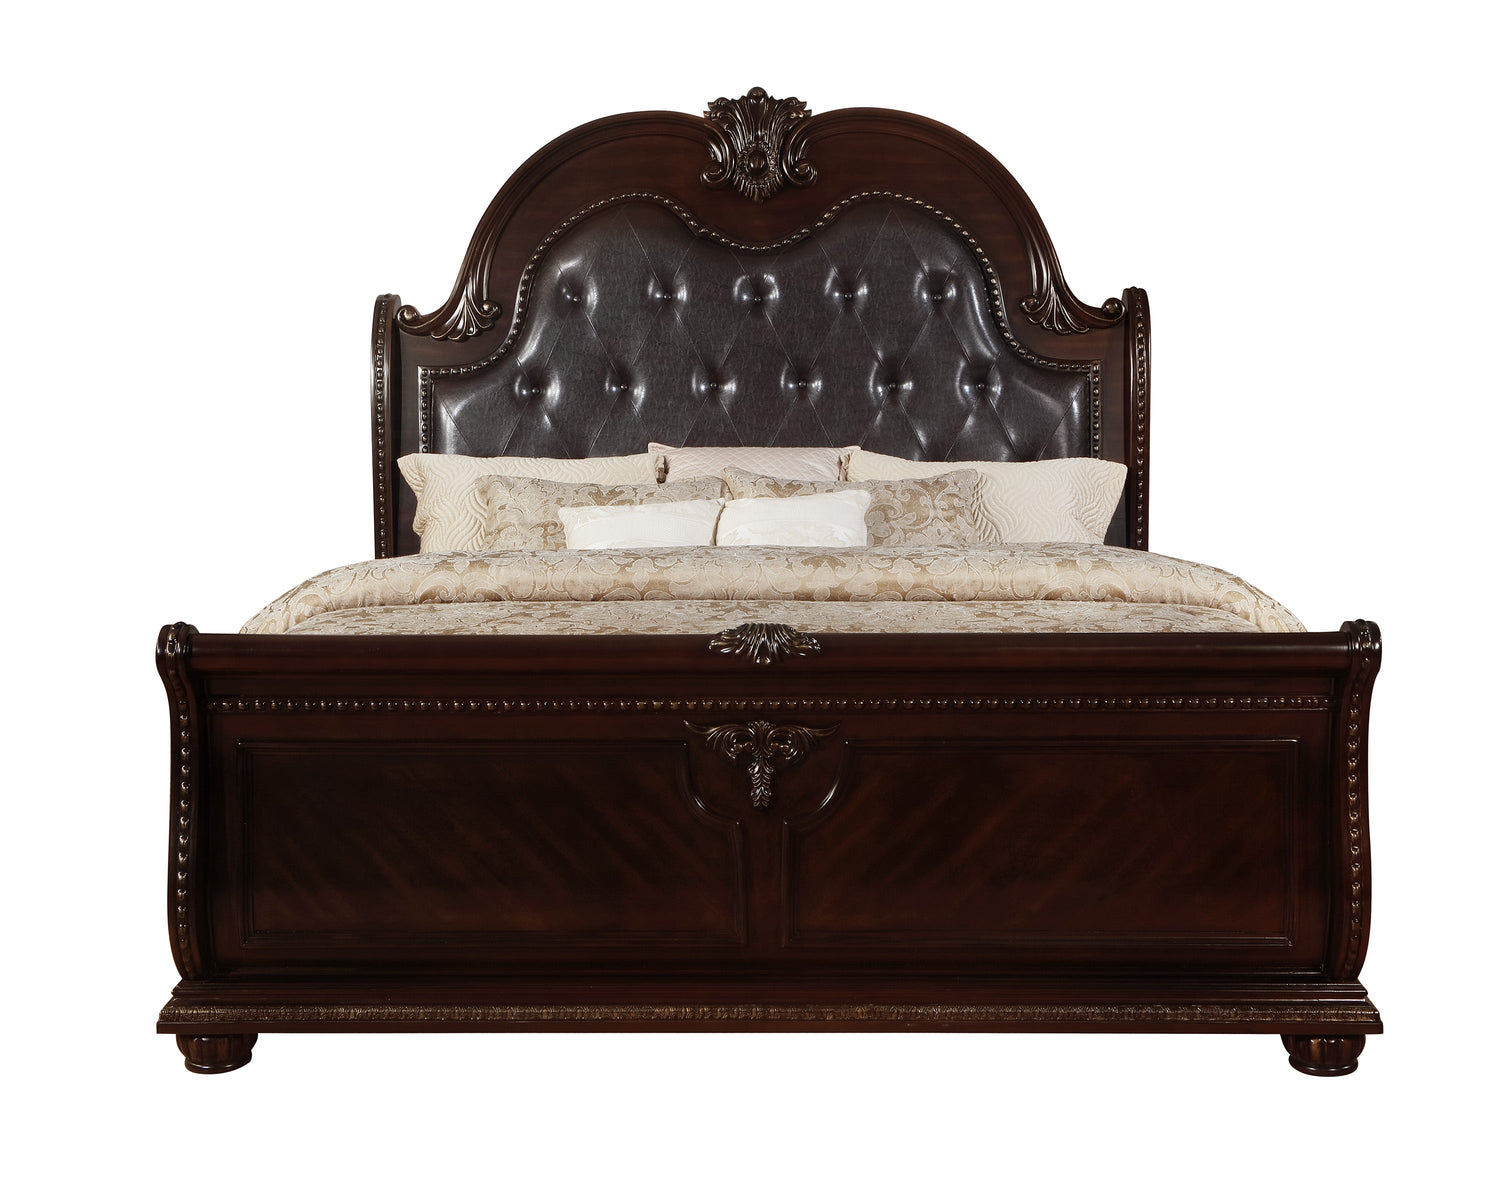 Stanley Cherry Brown Queen Upholstered Sleigh Bed - SET | B1600-Q-HB | B1600-Q-FB | B1600-KQ-HBLEG | B1600-KQ-RAIL - Bien Home Furniture &amp; Electronics